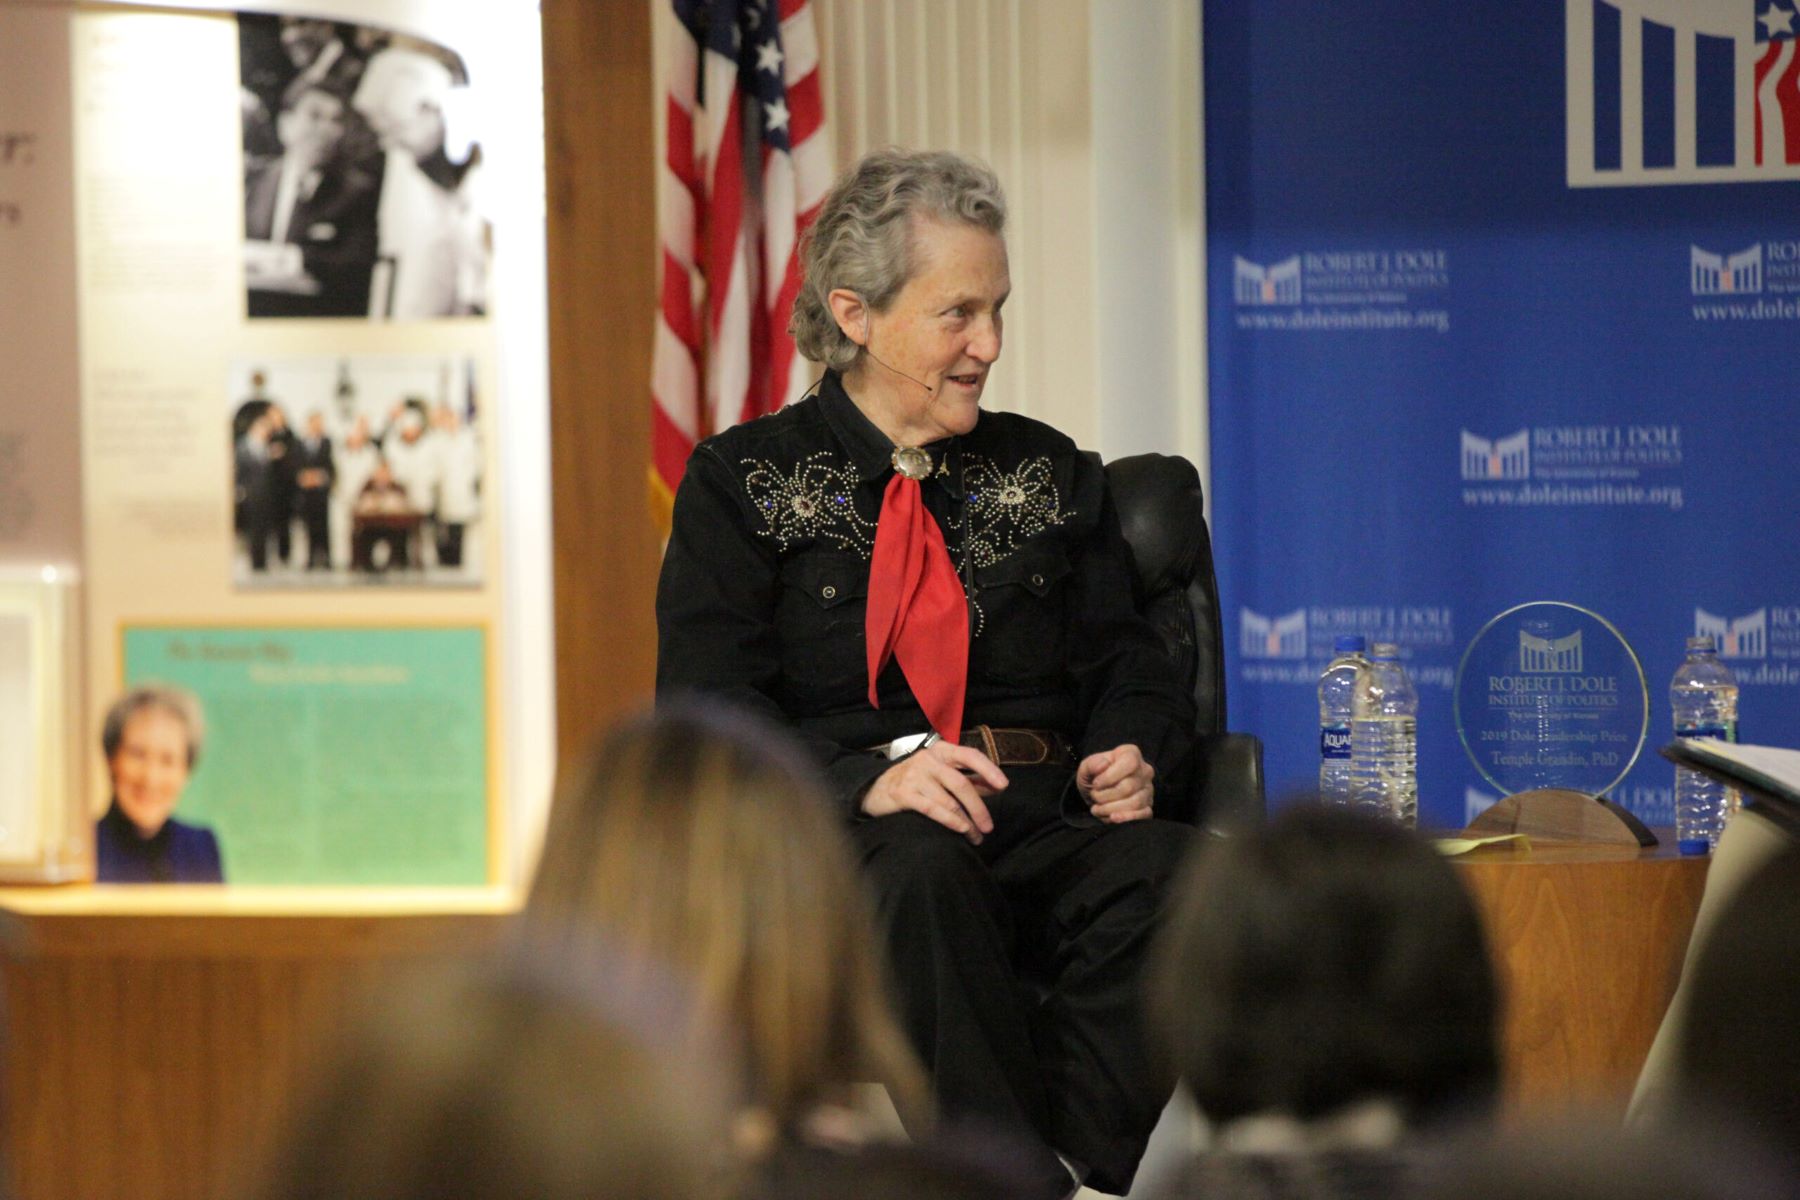 19-captivating-facts-about-dr-temple-grandin